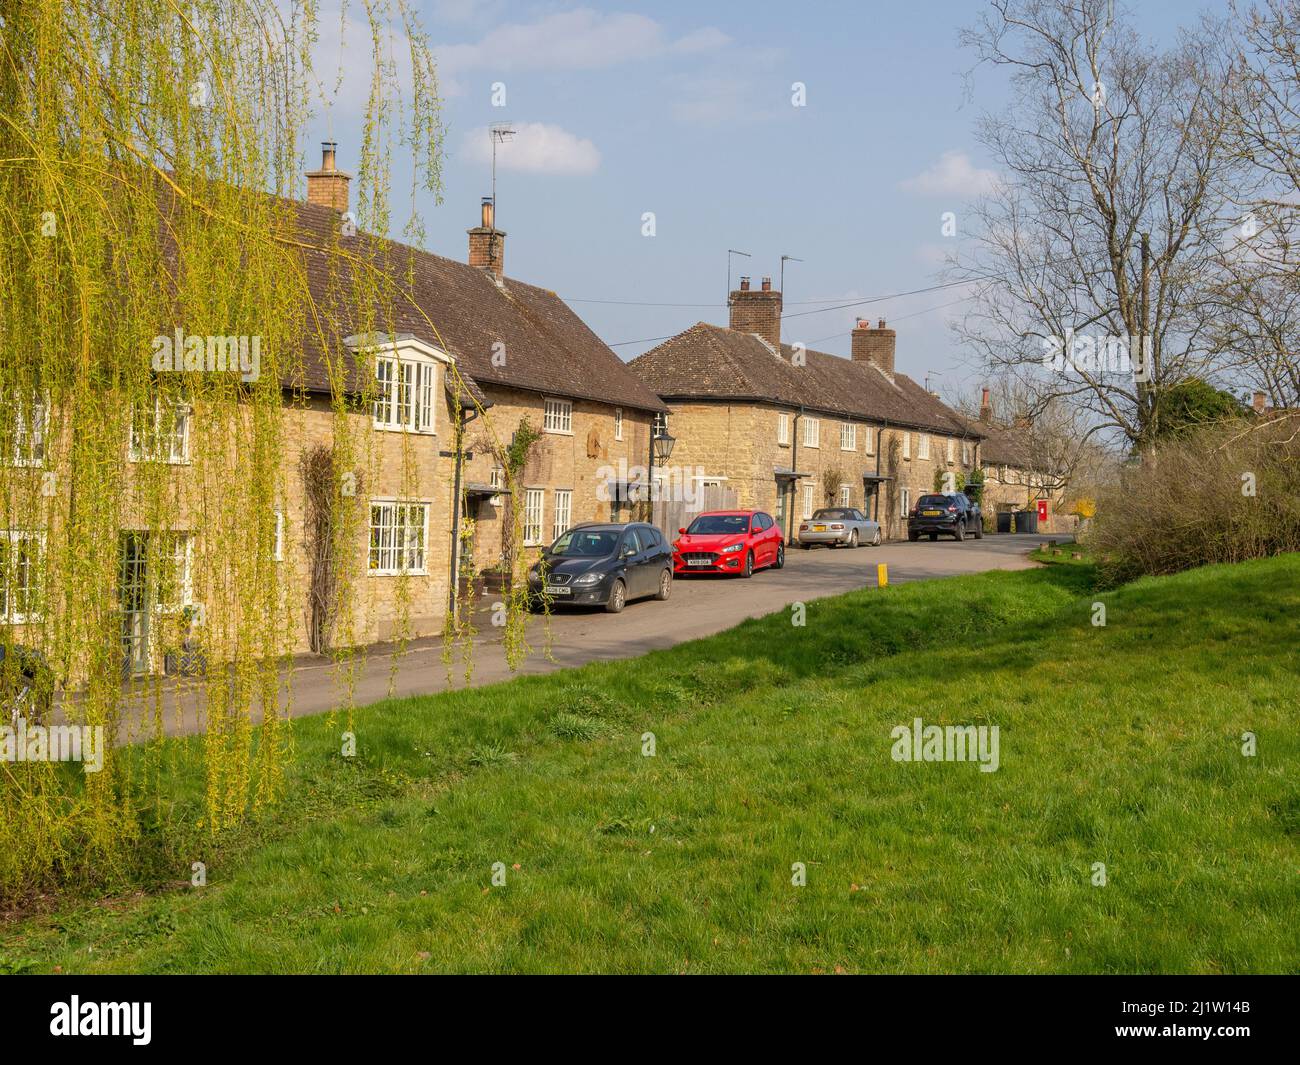 Street view in Spring in the attractive hamlet of Courteenhall, Northamptonshire, UK Stock Photo